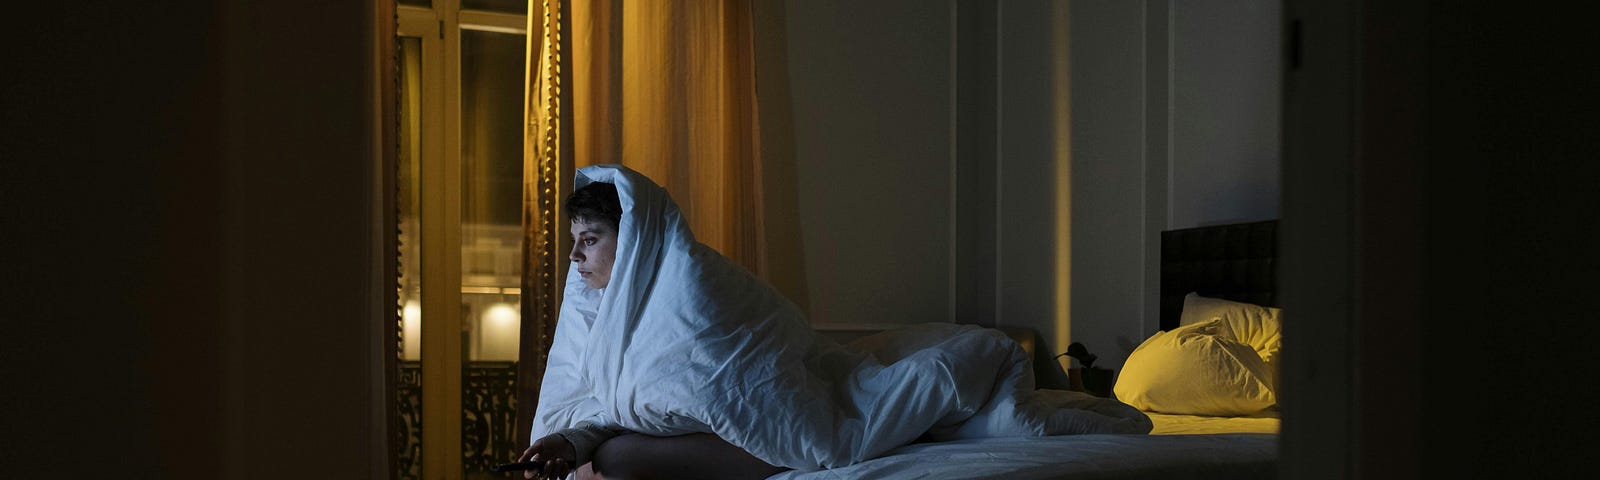 photo-of-a-woman-sitting-on-the-bed-while-covered-by-a-white-blanket